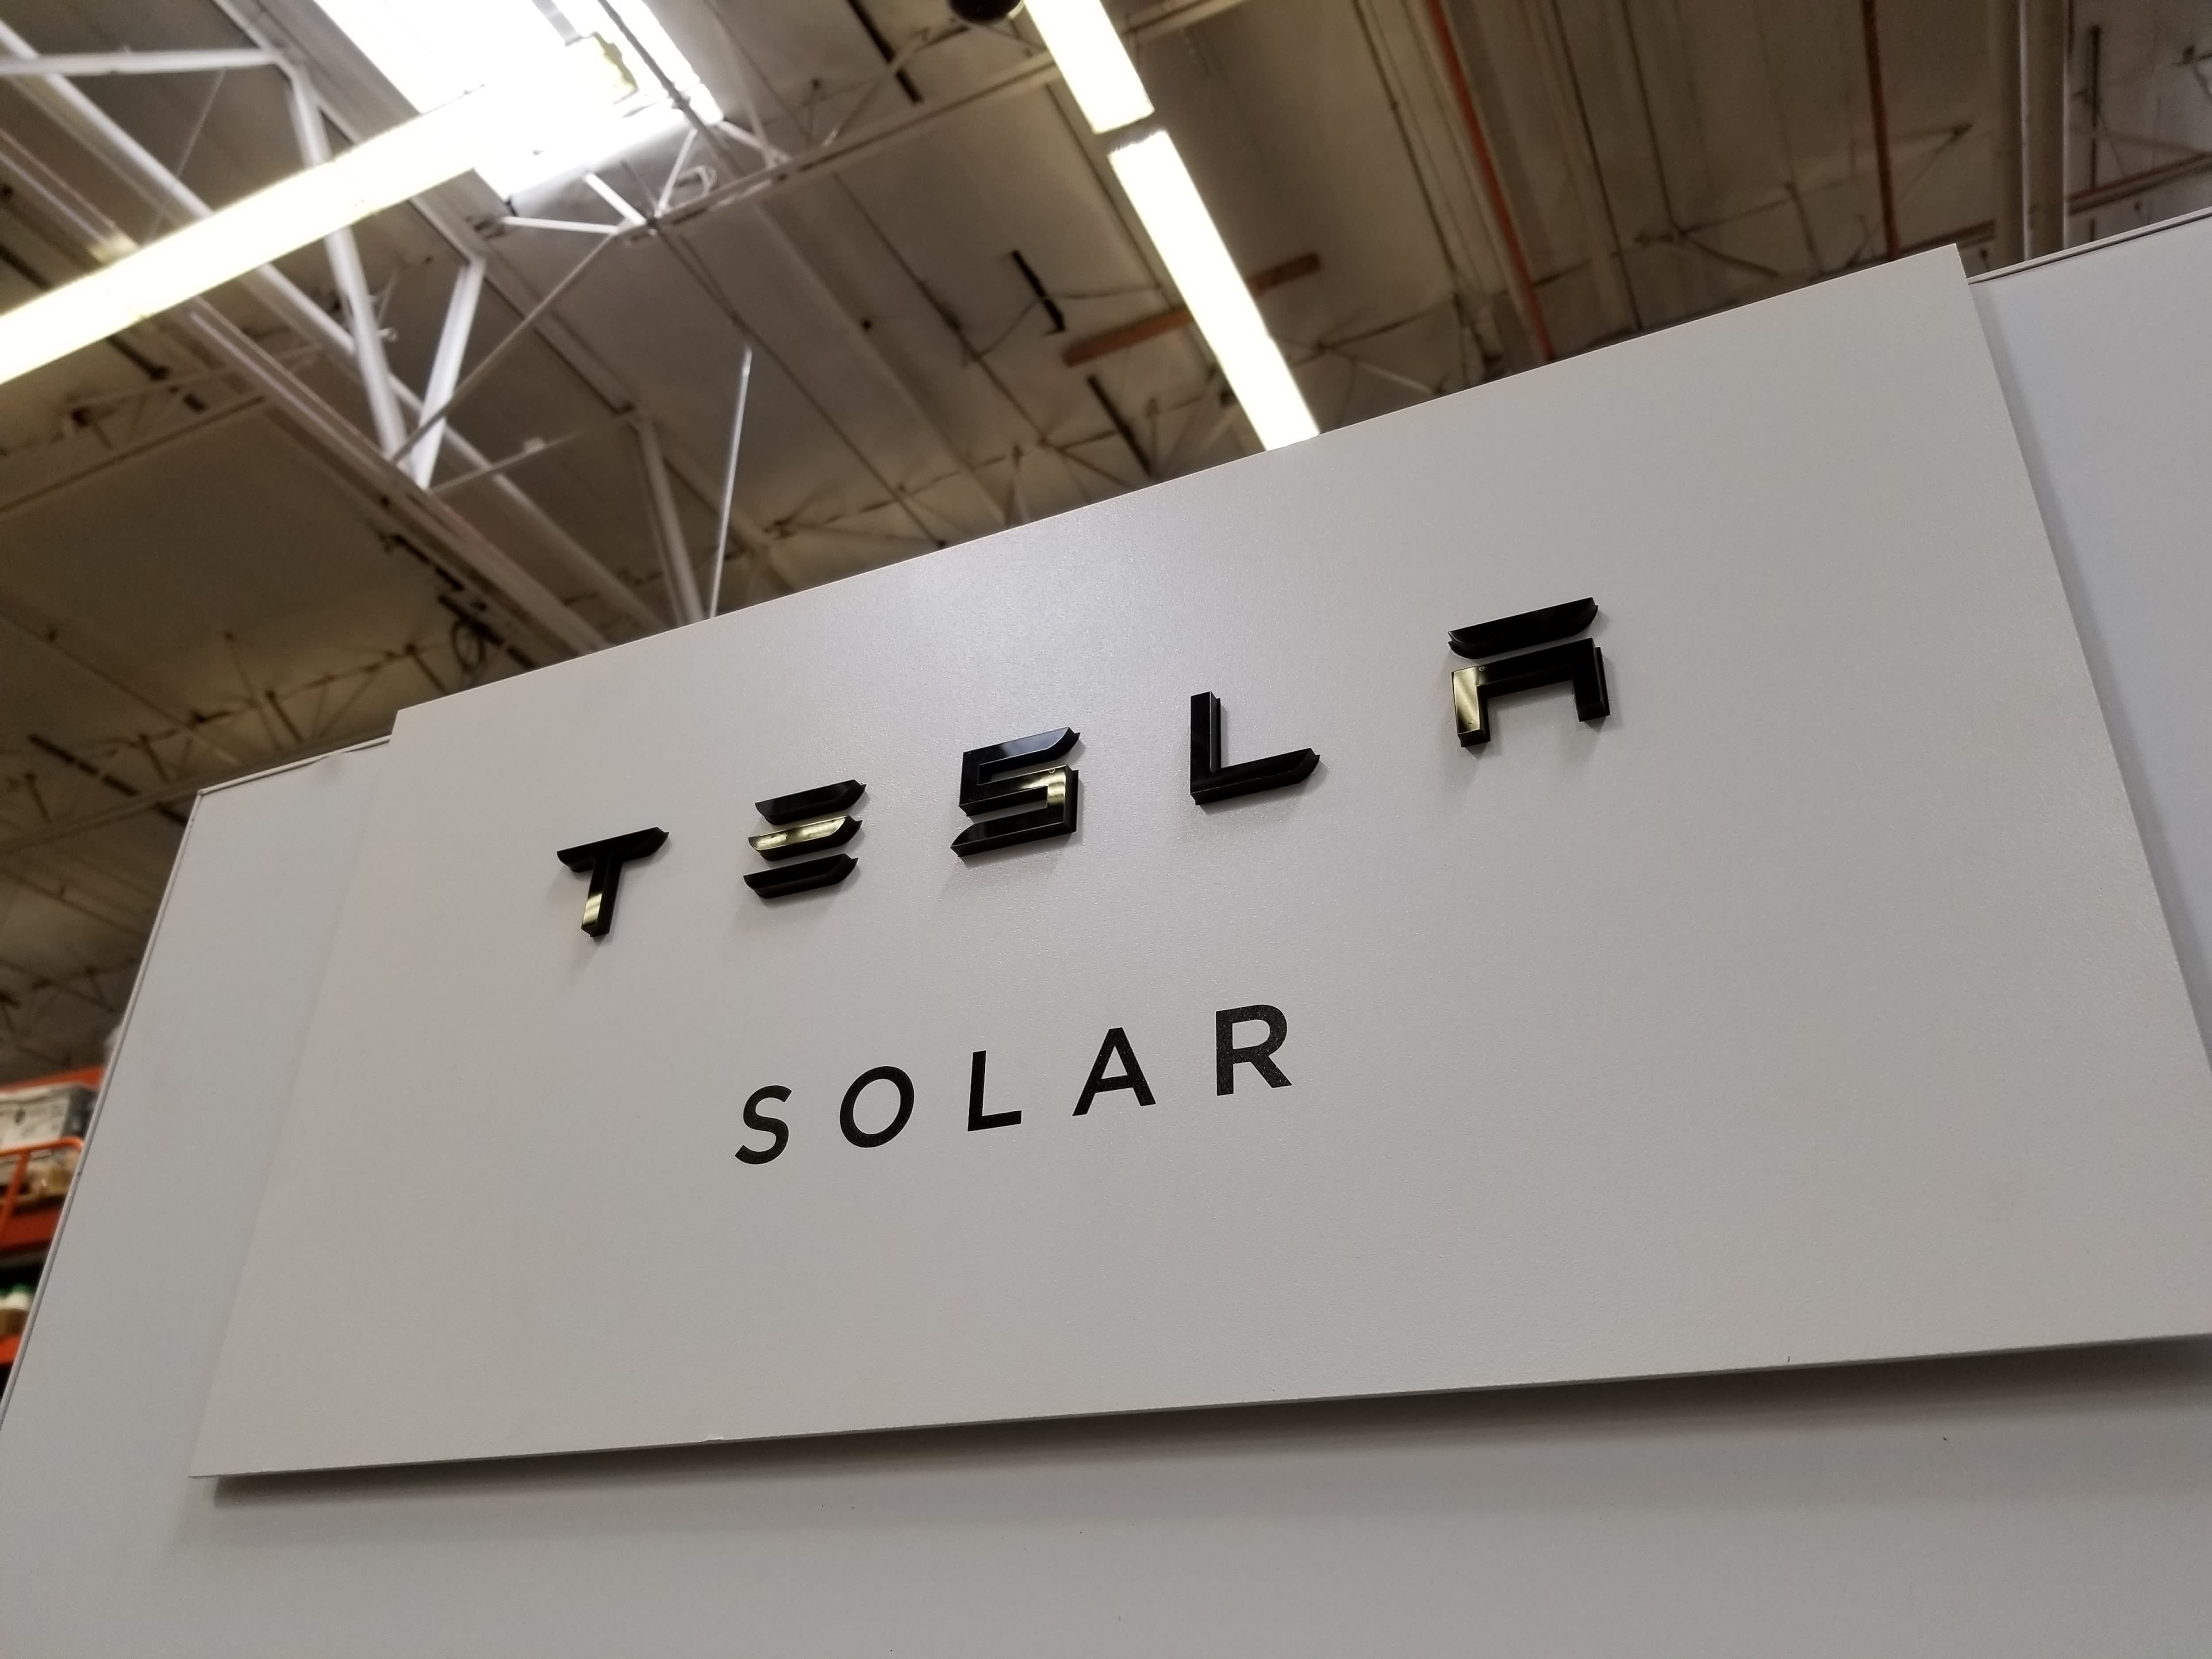 Tesla to reverse solar price hike for some customers, legal filing says